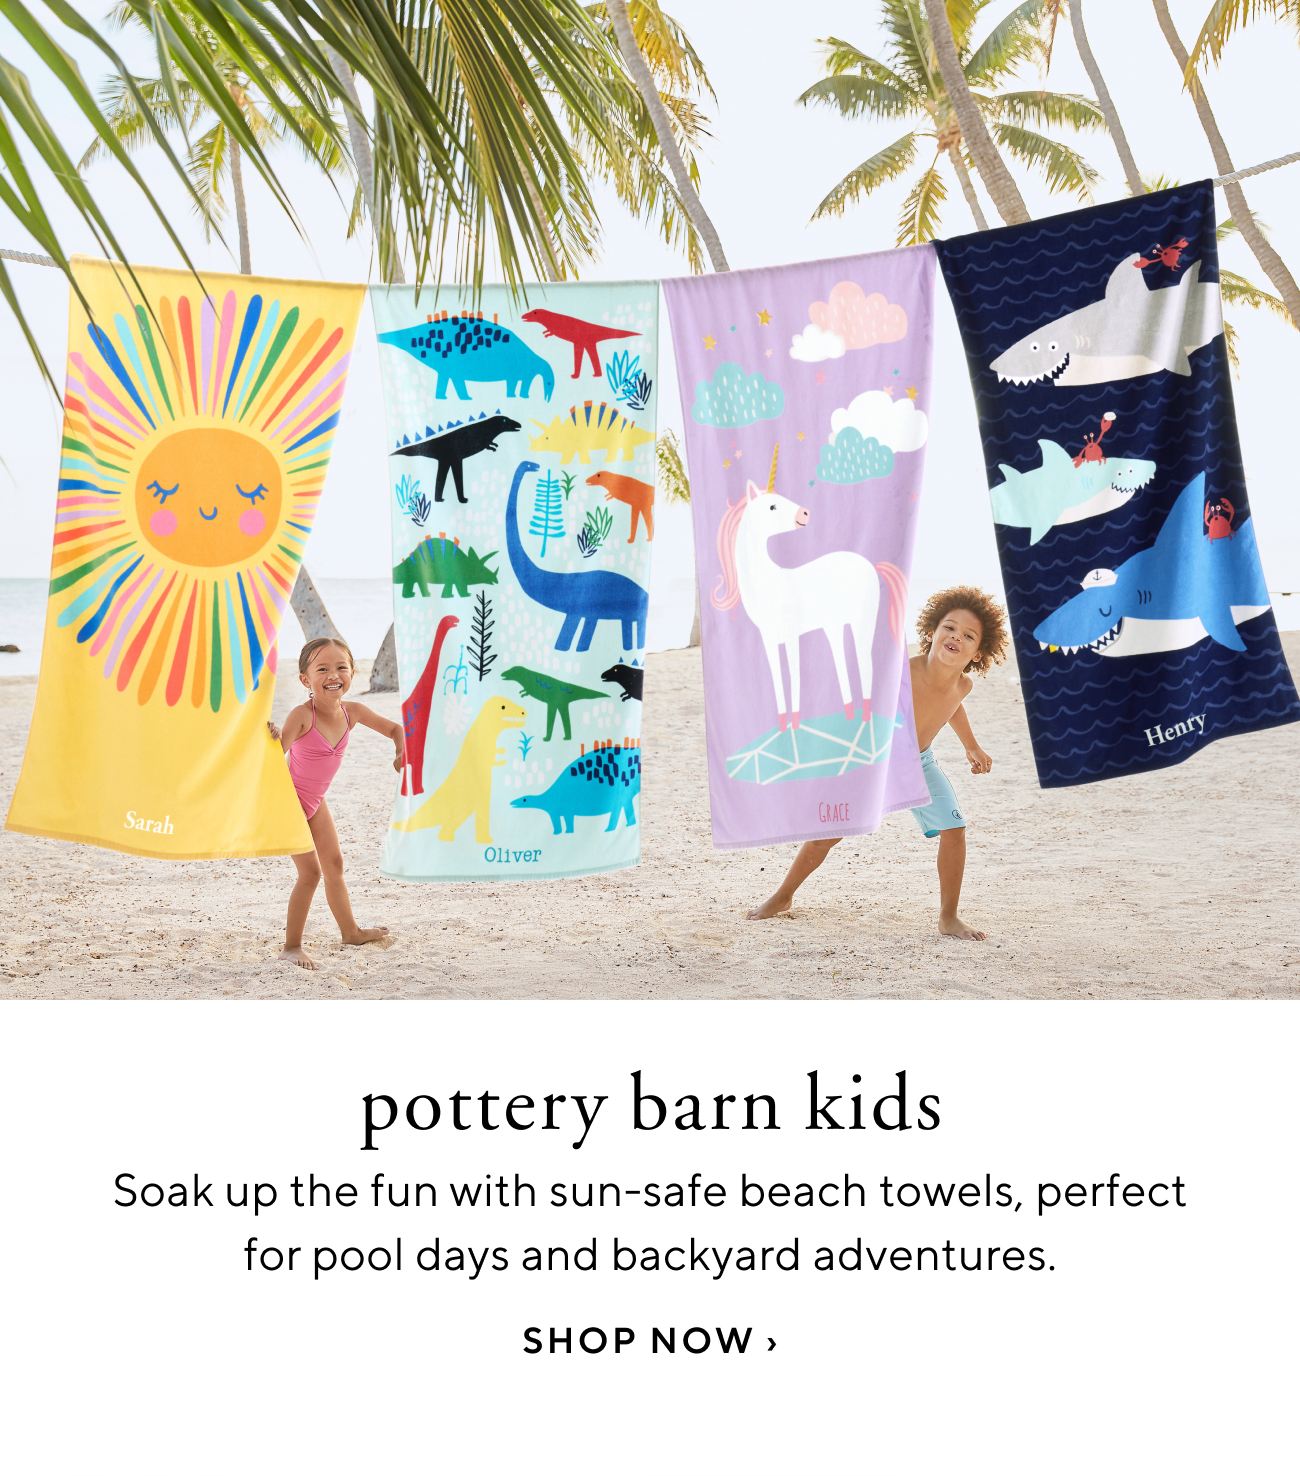  pottery barn kids Soak up the fun with sun-safe beach towels, perfect for pool days and backyard adventures. SHOP NOW 